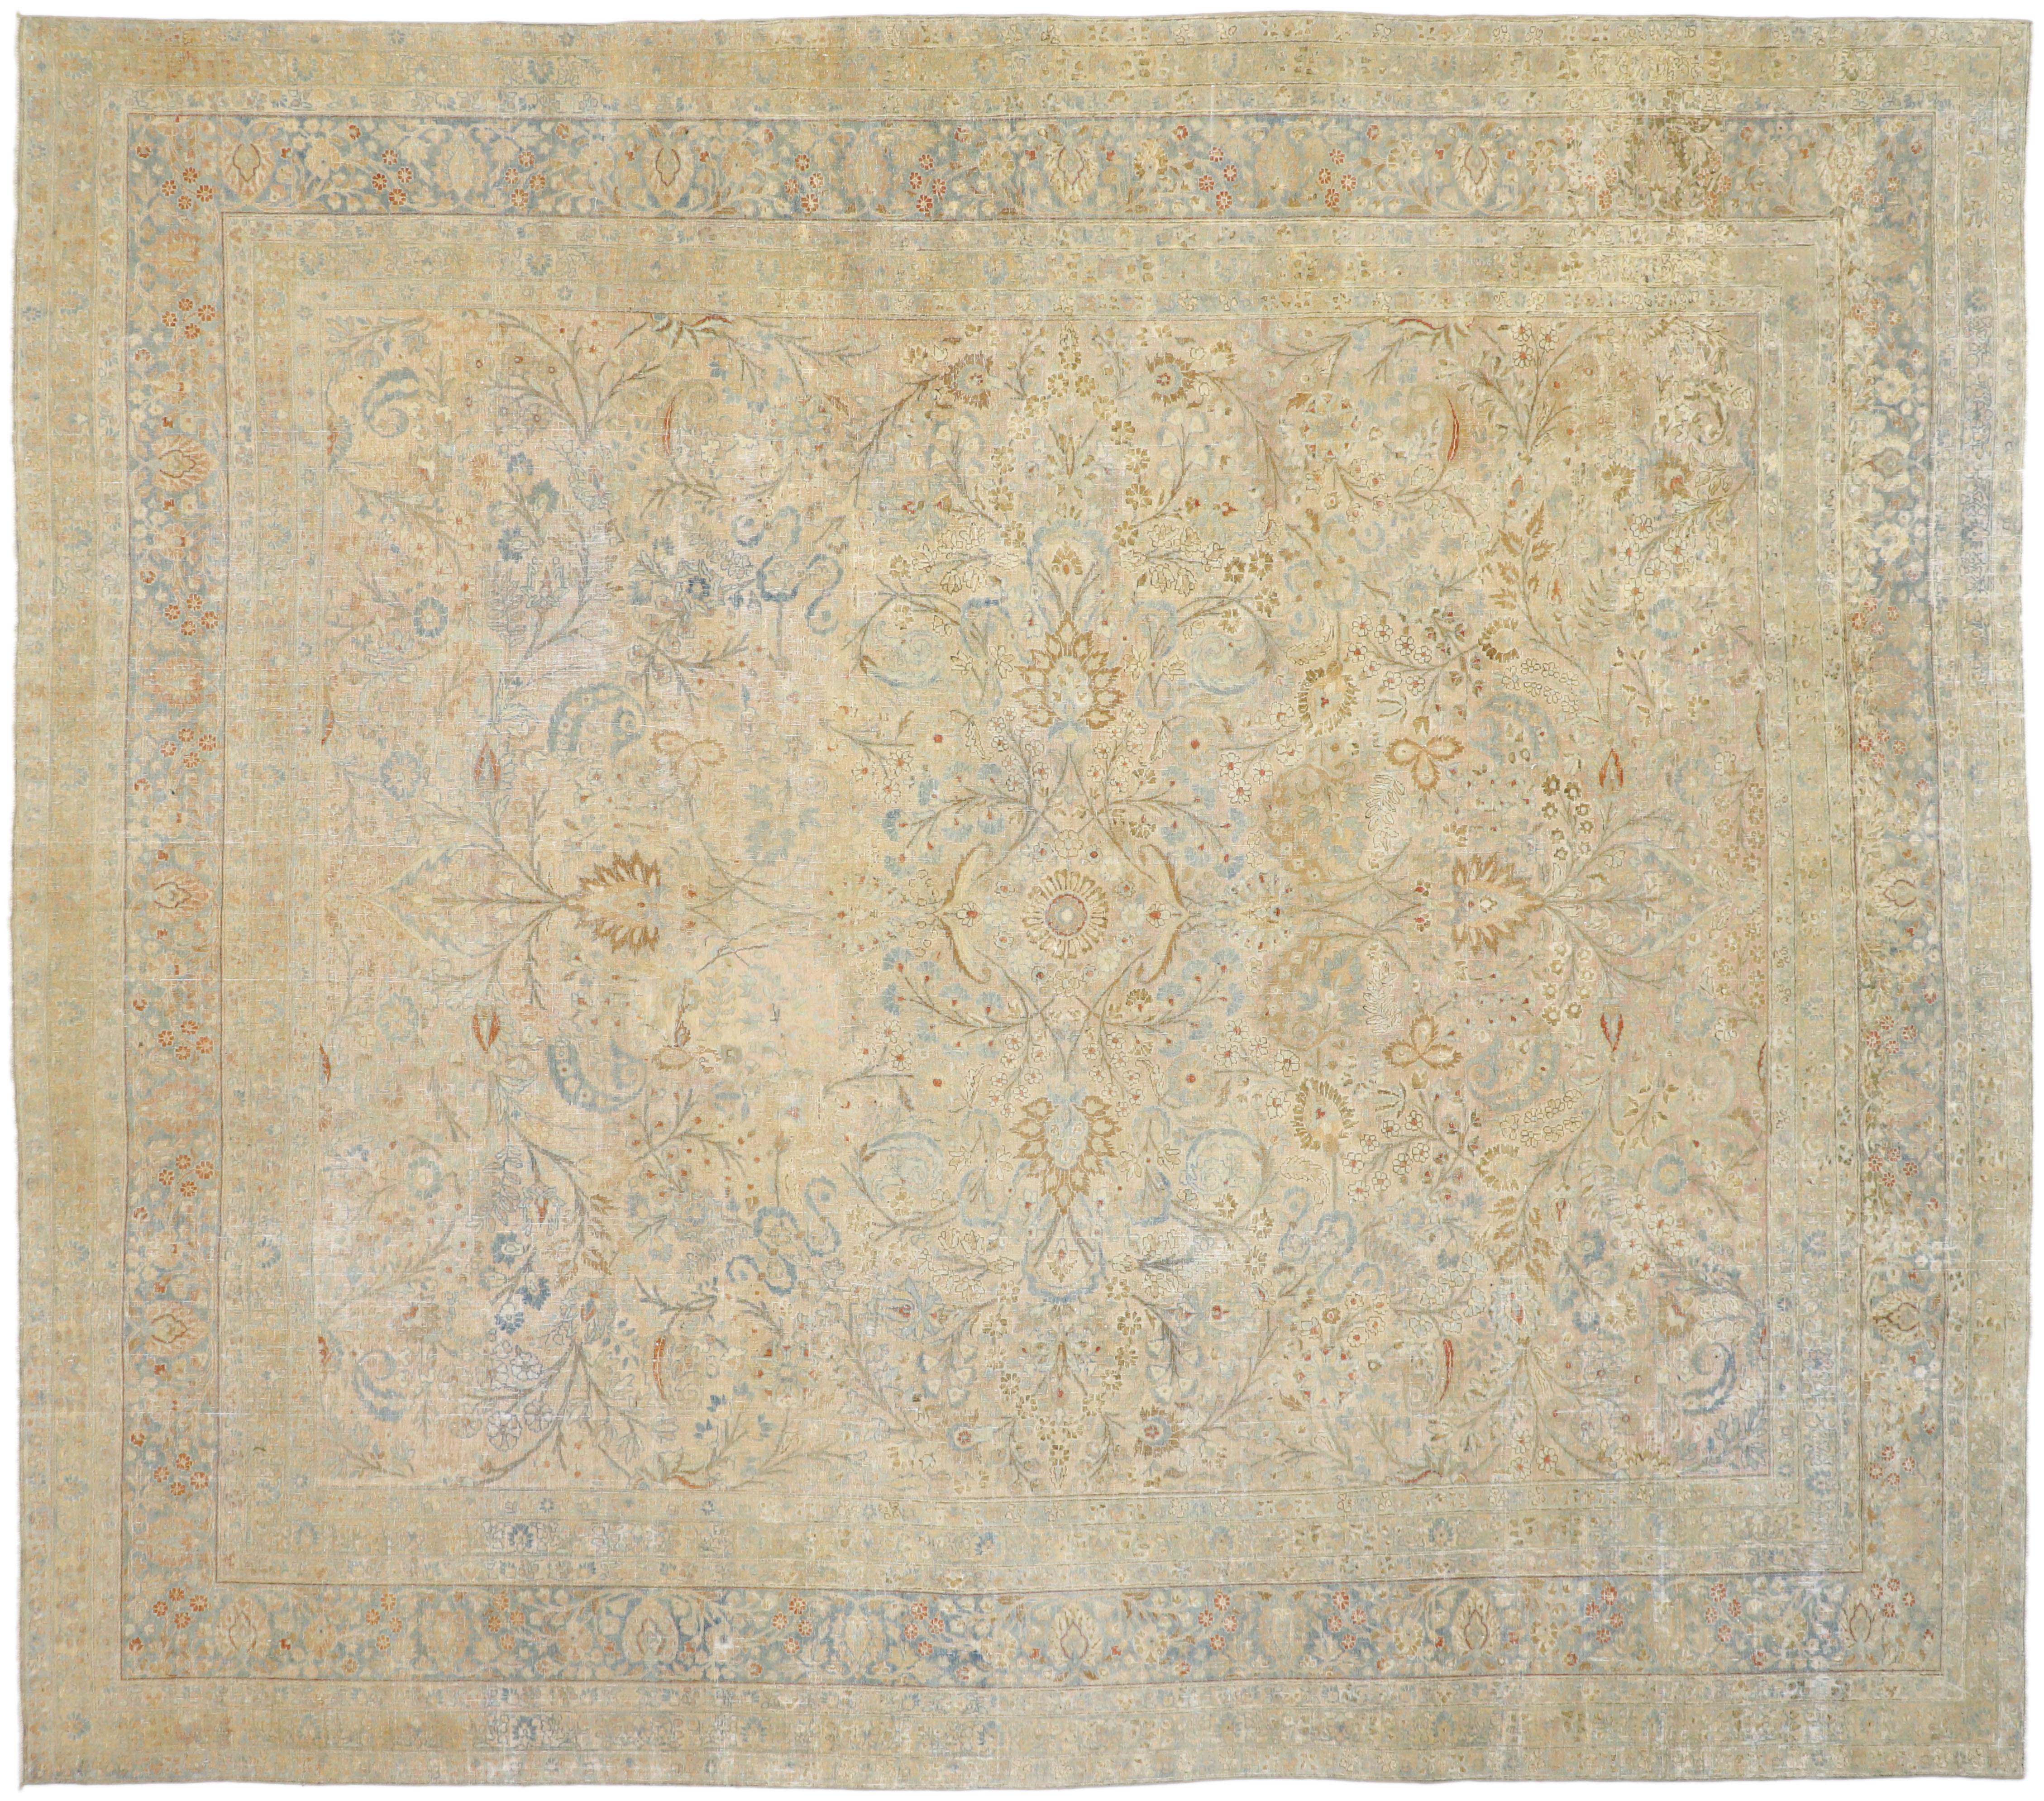 Distressed Antique Persian Khorassan Design Rug with Rustic English Manor Style 2